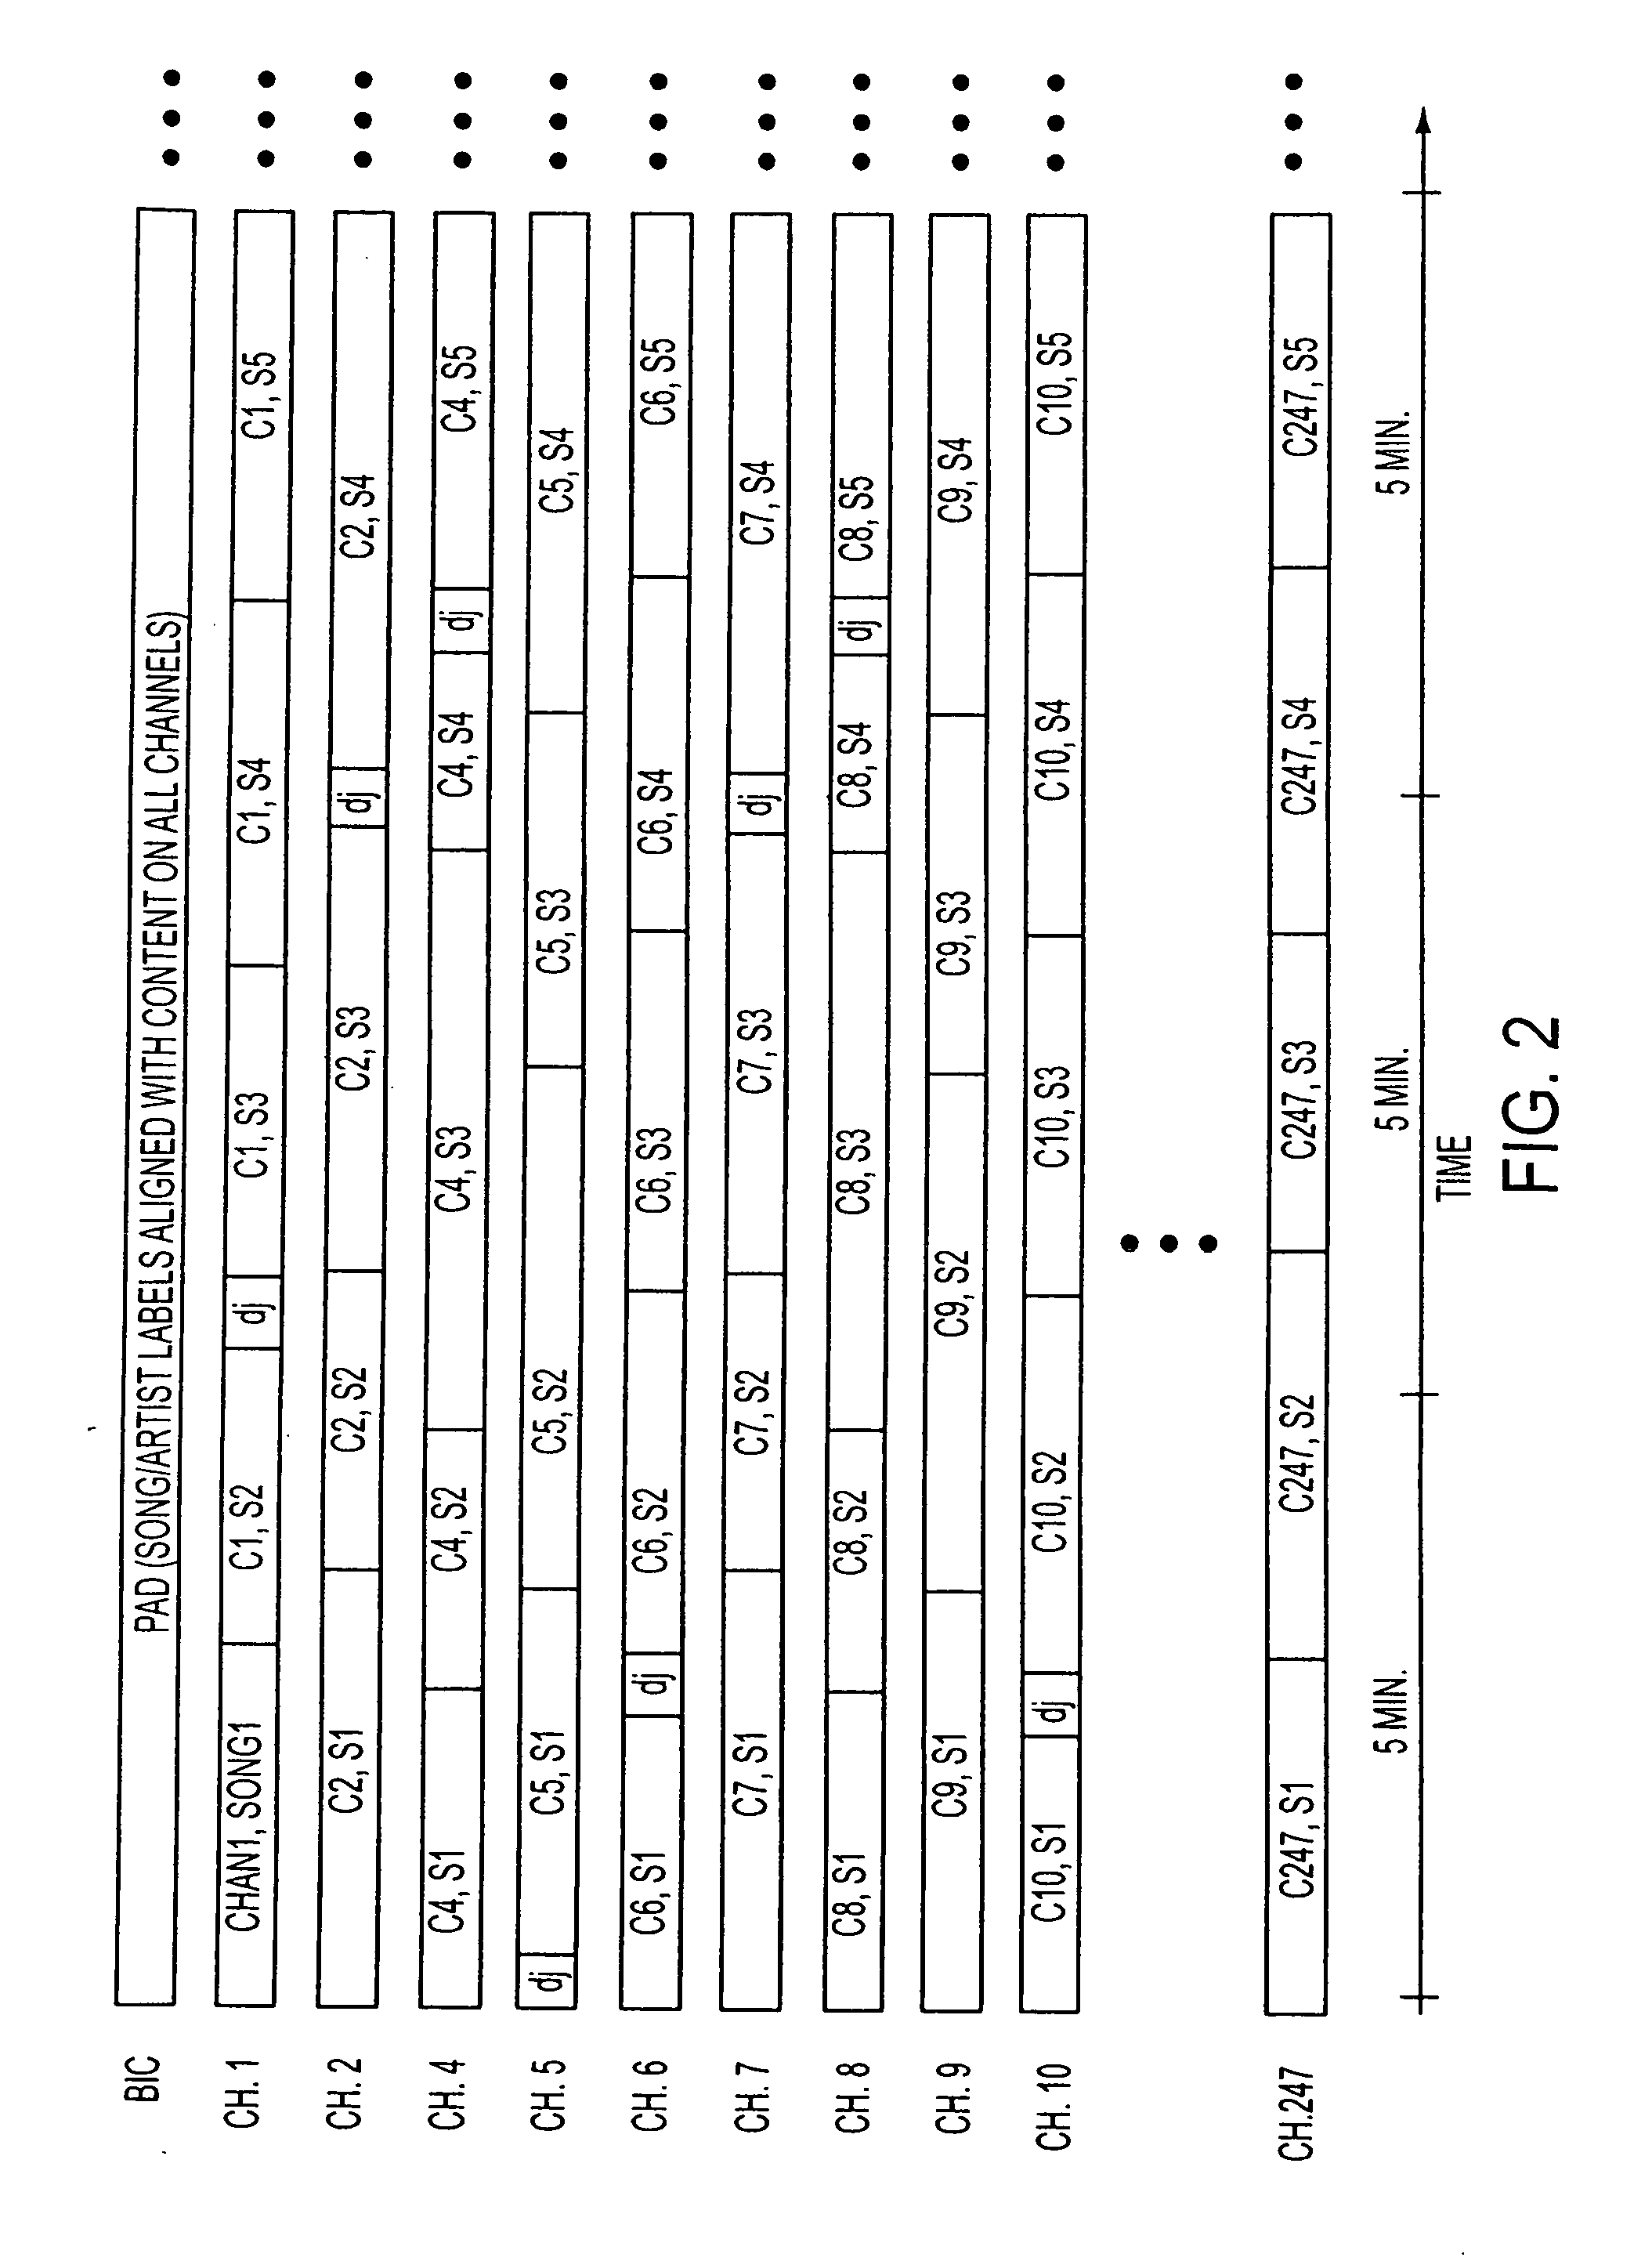 Method and apparatus for multiplexing audio program channels from one or more received broadcast streams to provide a playlist style listening experience to users